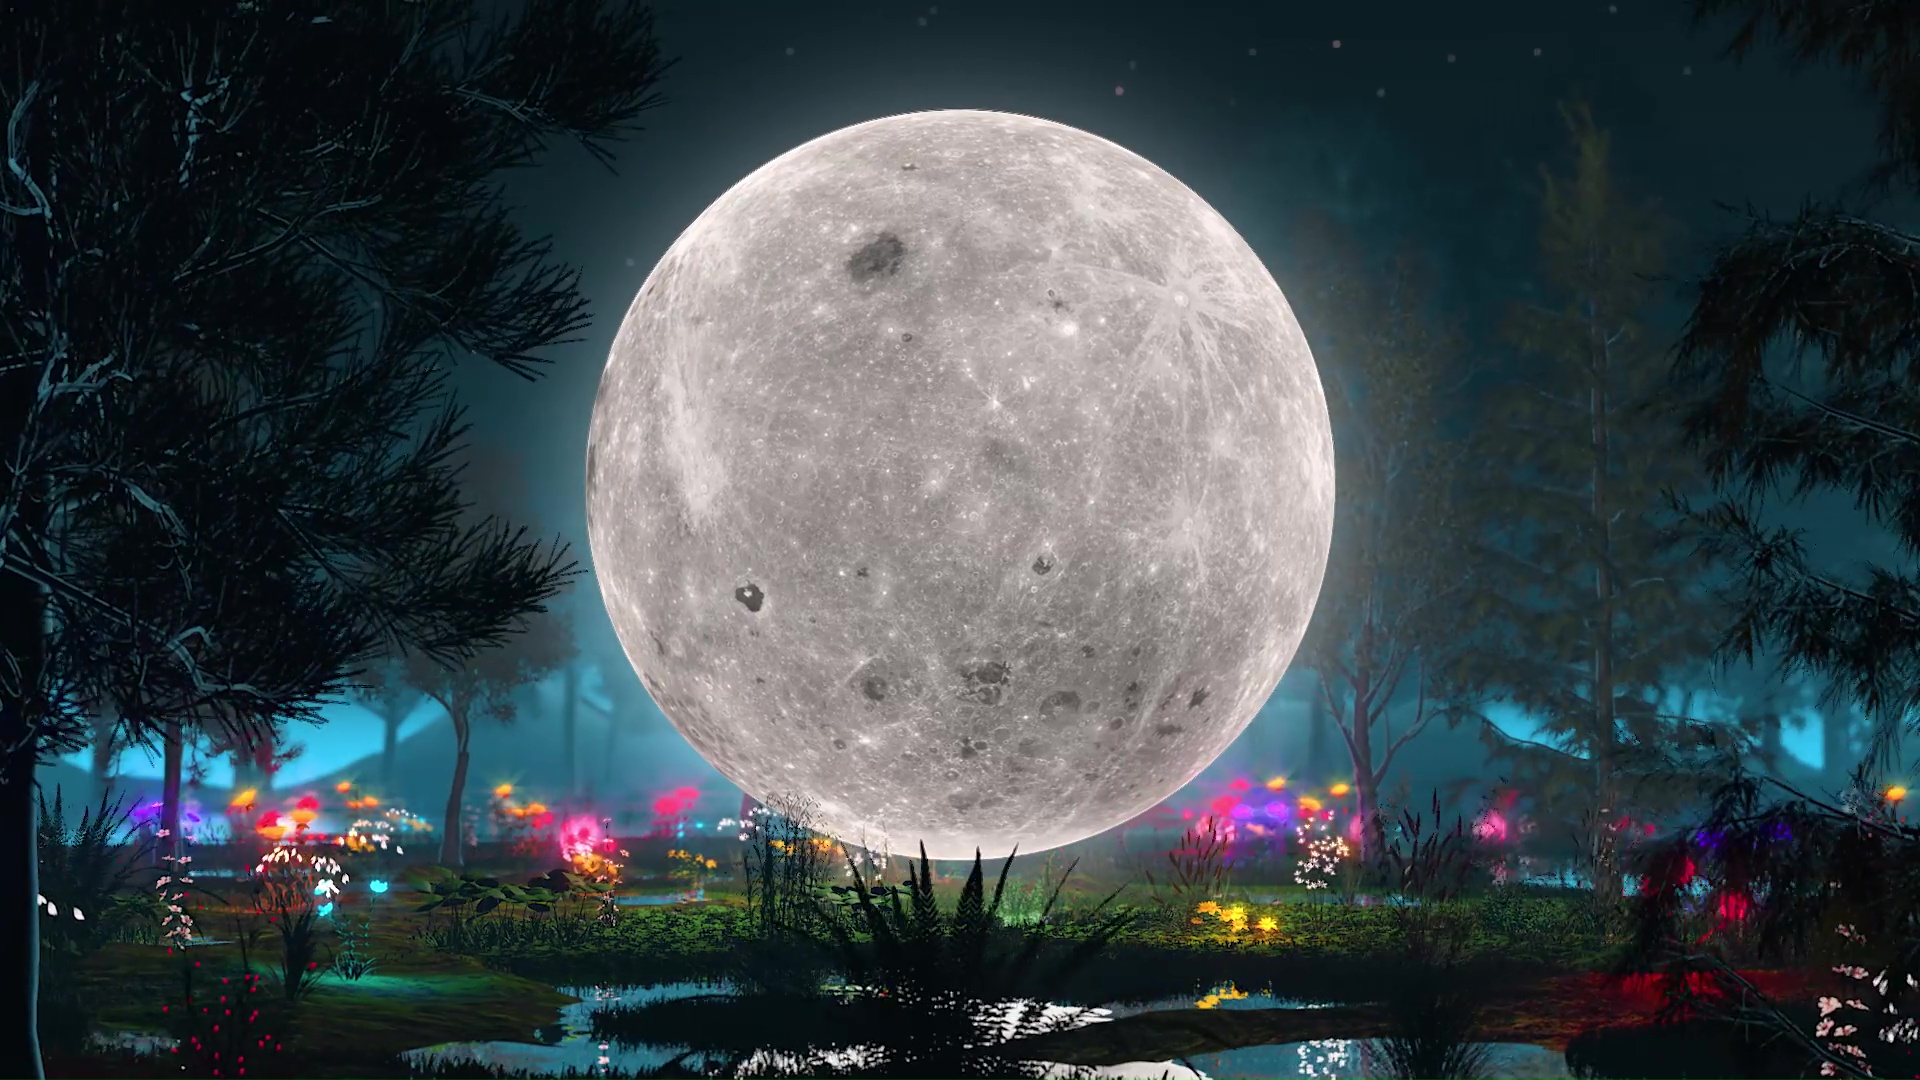 To The Moon by VISUALDON (loop) Live Wallpaper - Live Wallpaper